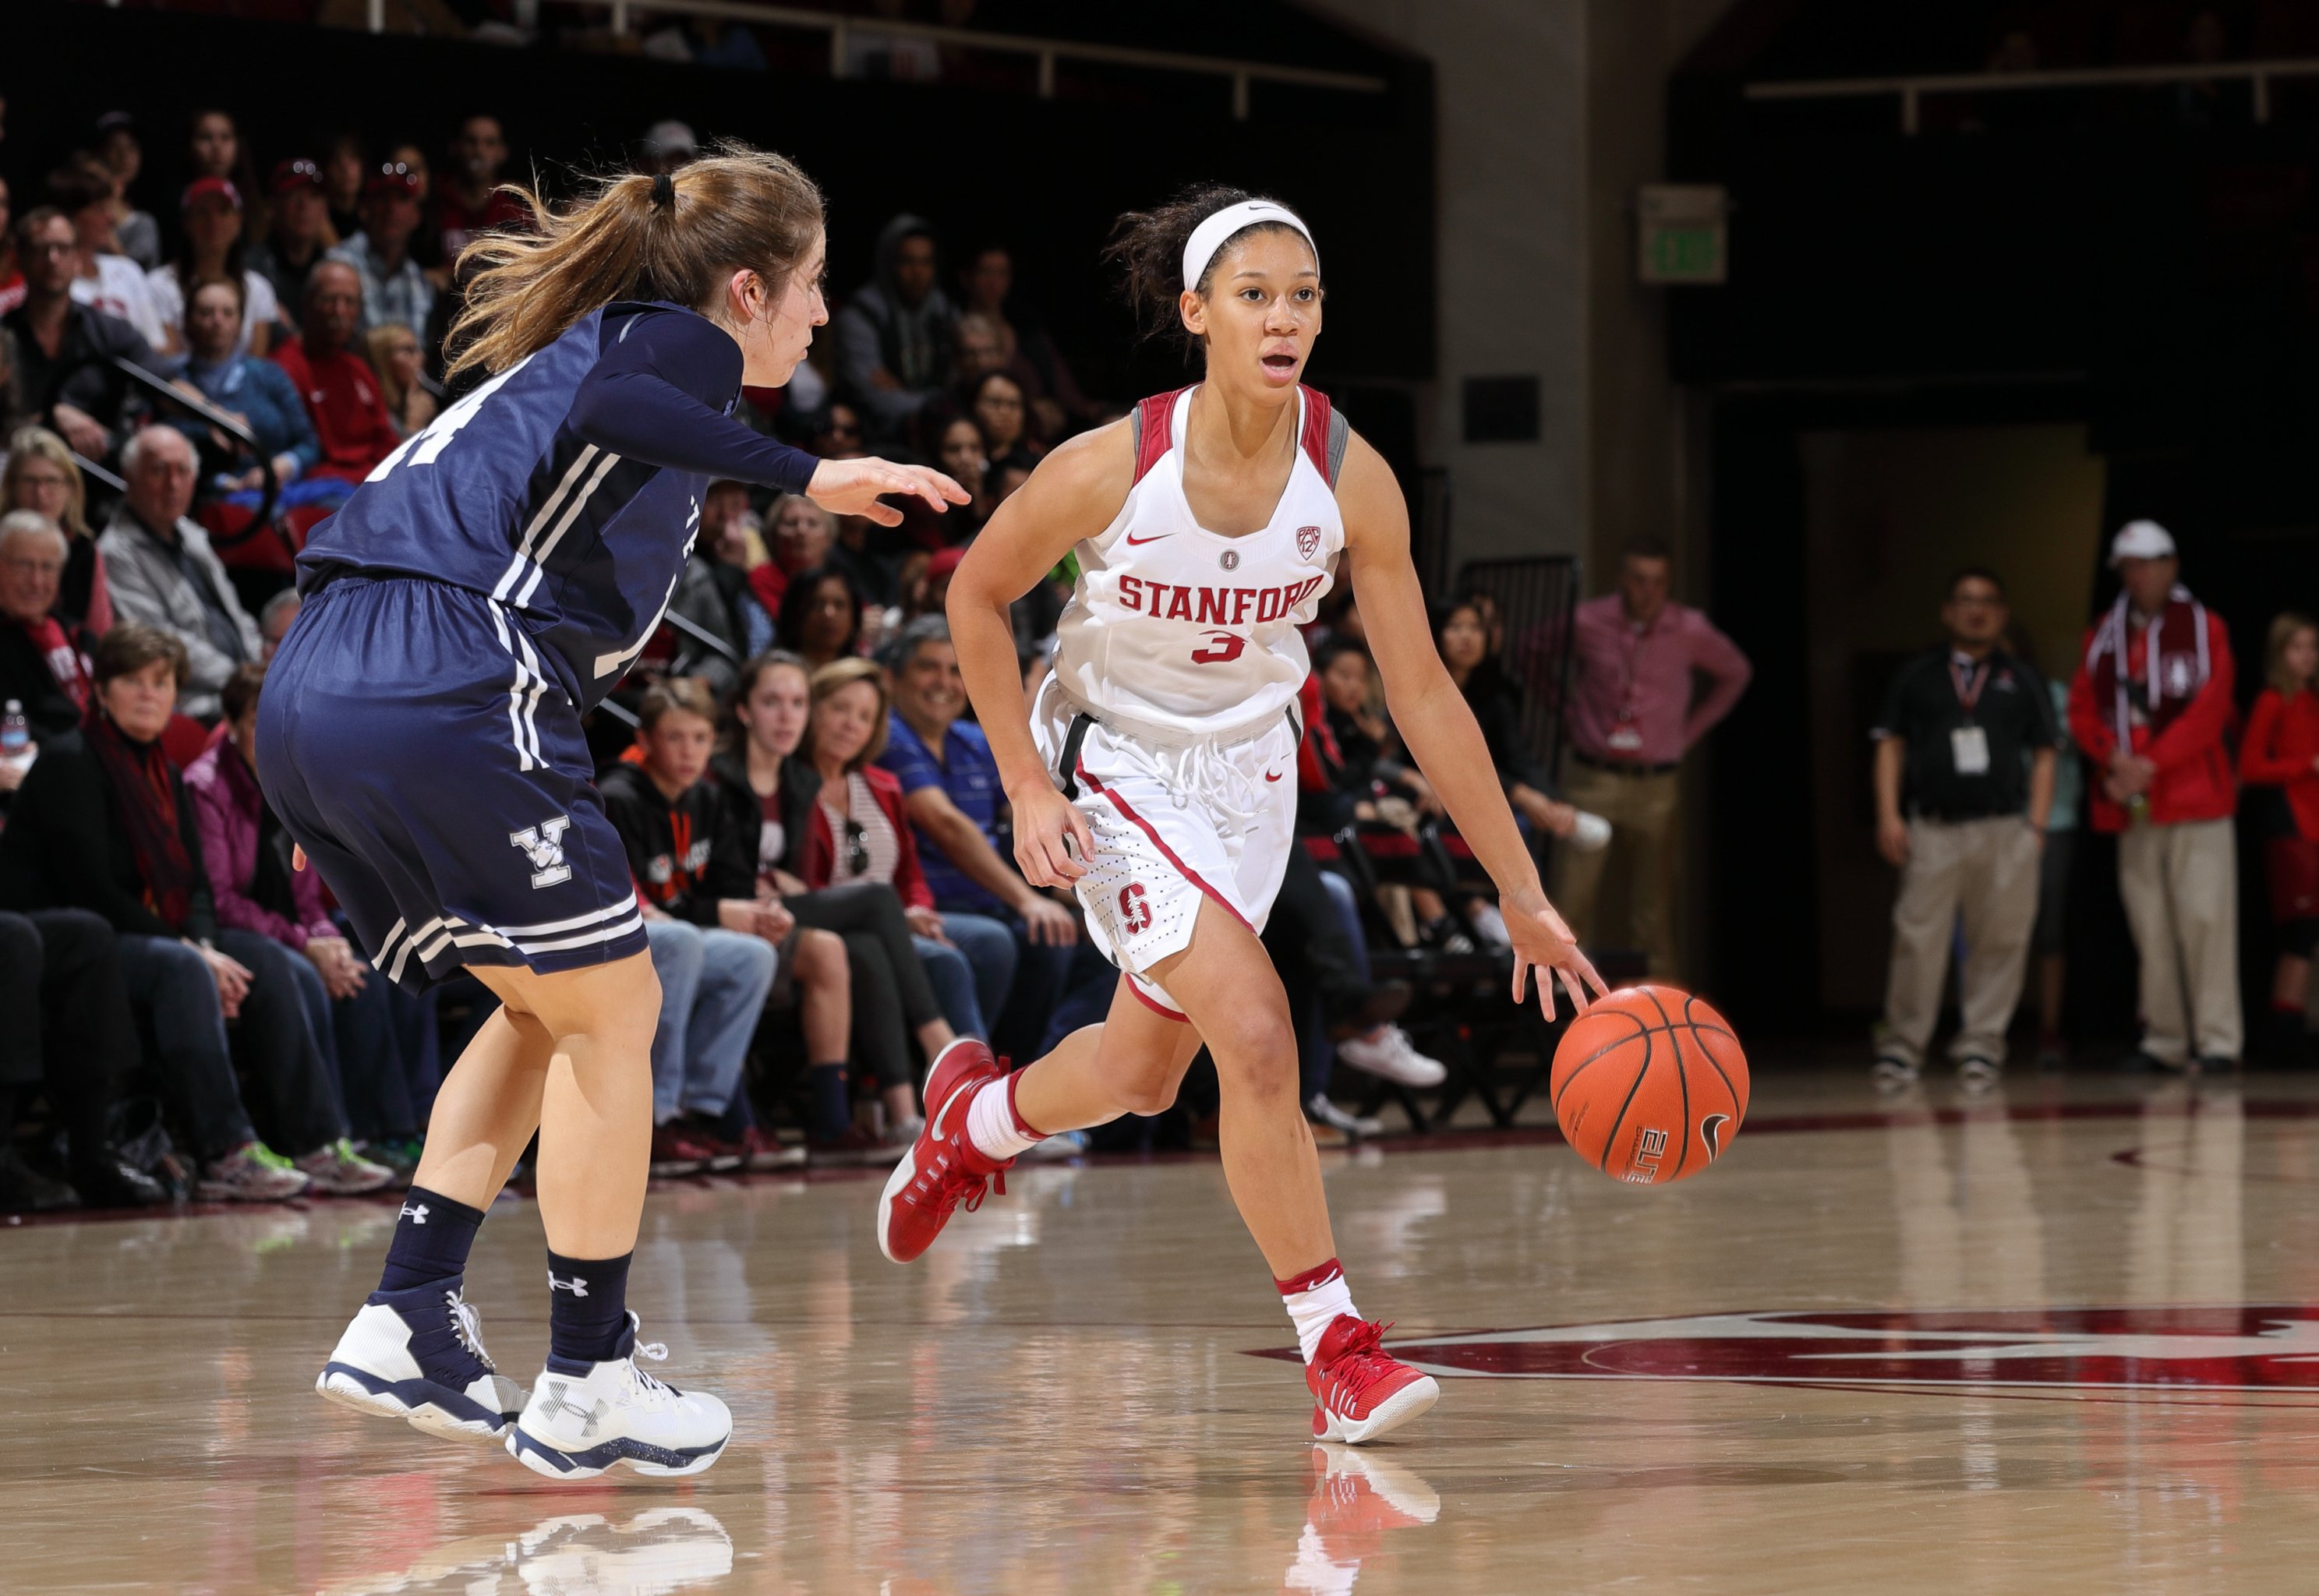 Stanford's Anna Wilson, buoyed by brother Russell's support, steps into  national spotlight